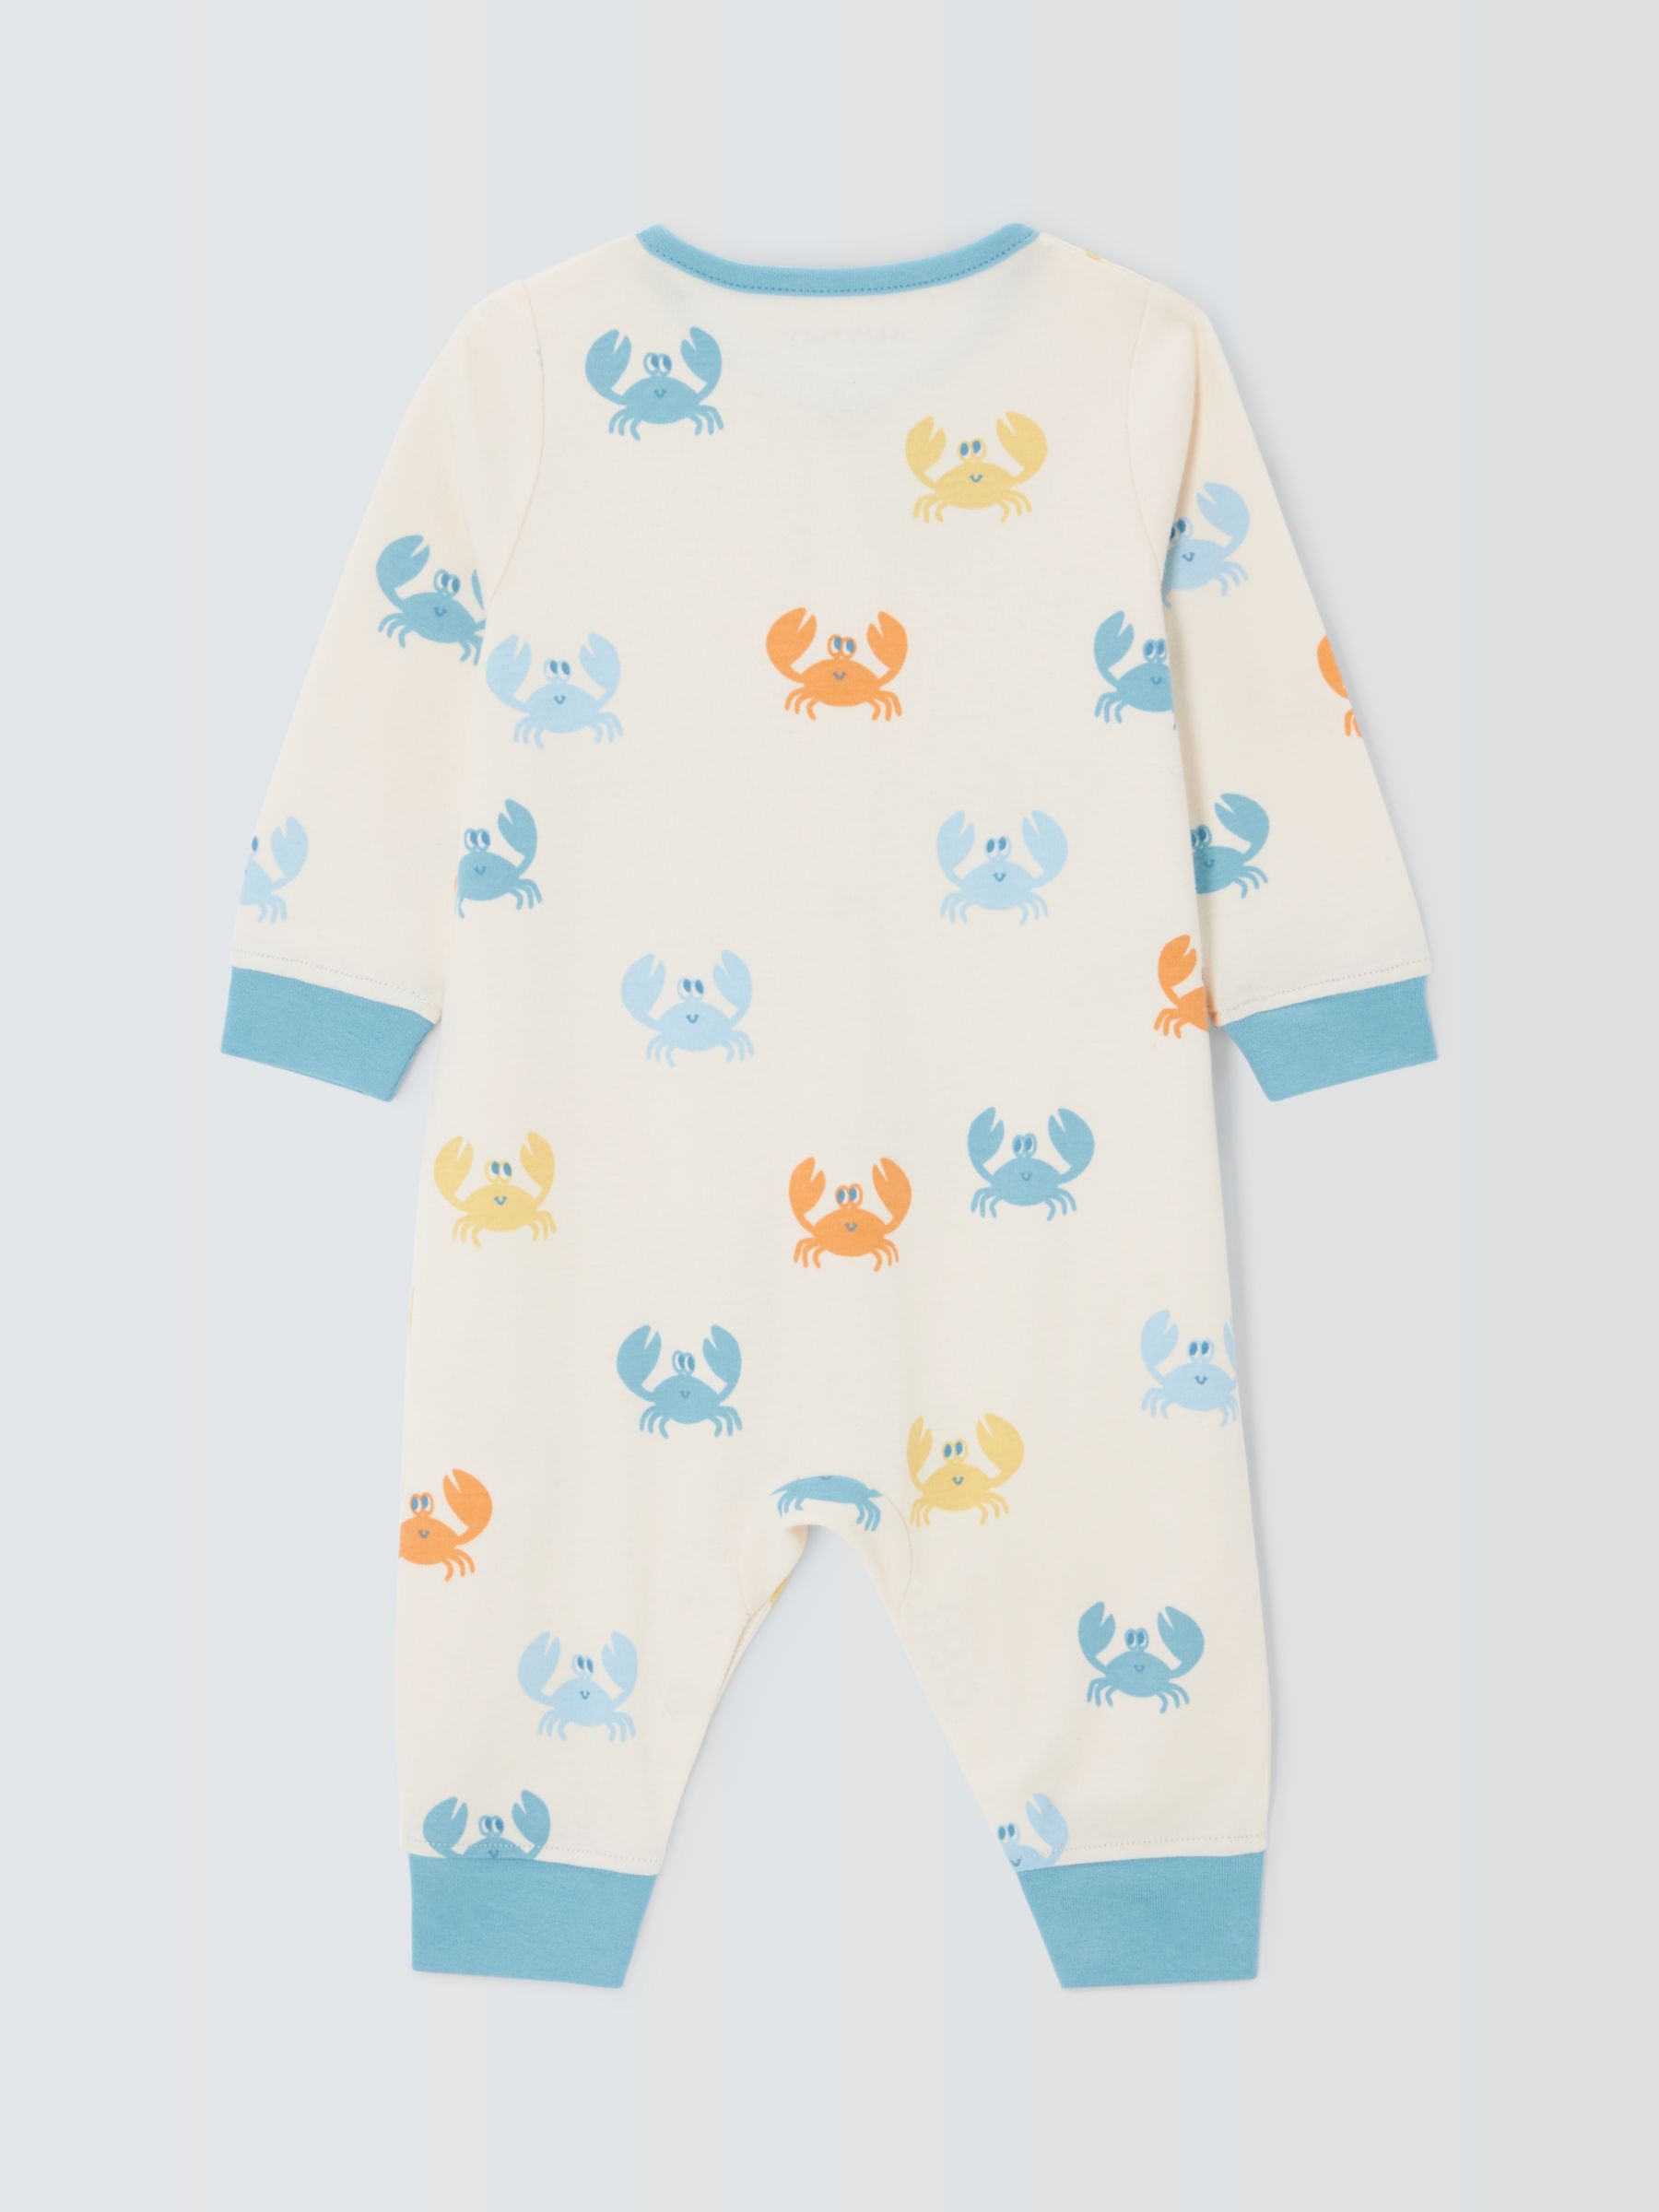 John Lewis ANYDAY Baby Cotton Crab Print Sleepsuit, Blue, 9-12 months